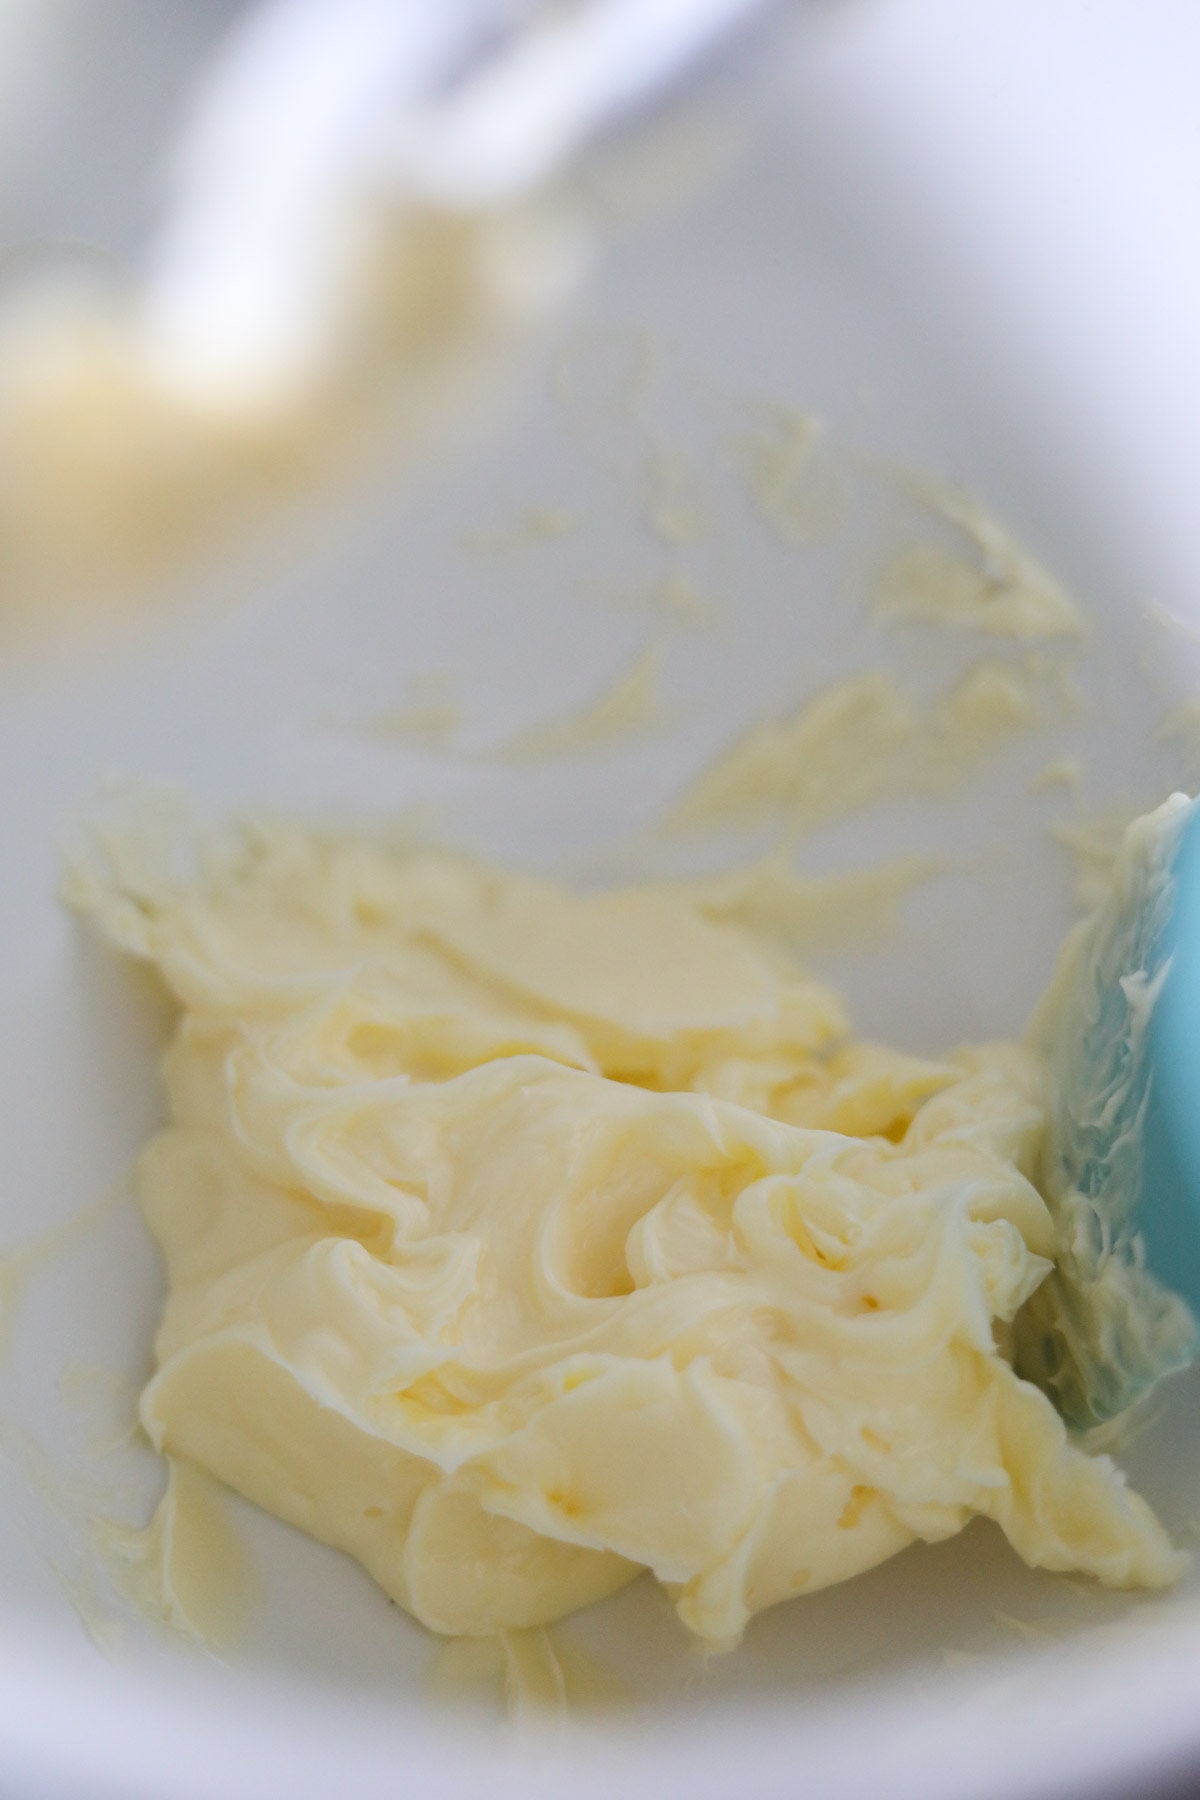 butter creamed in a mixing bowl.